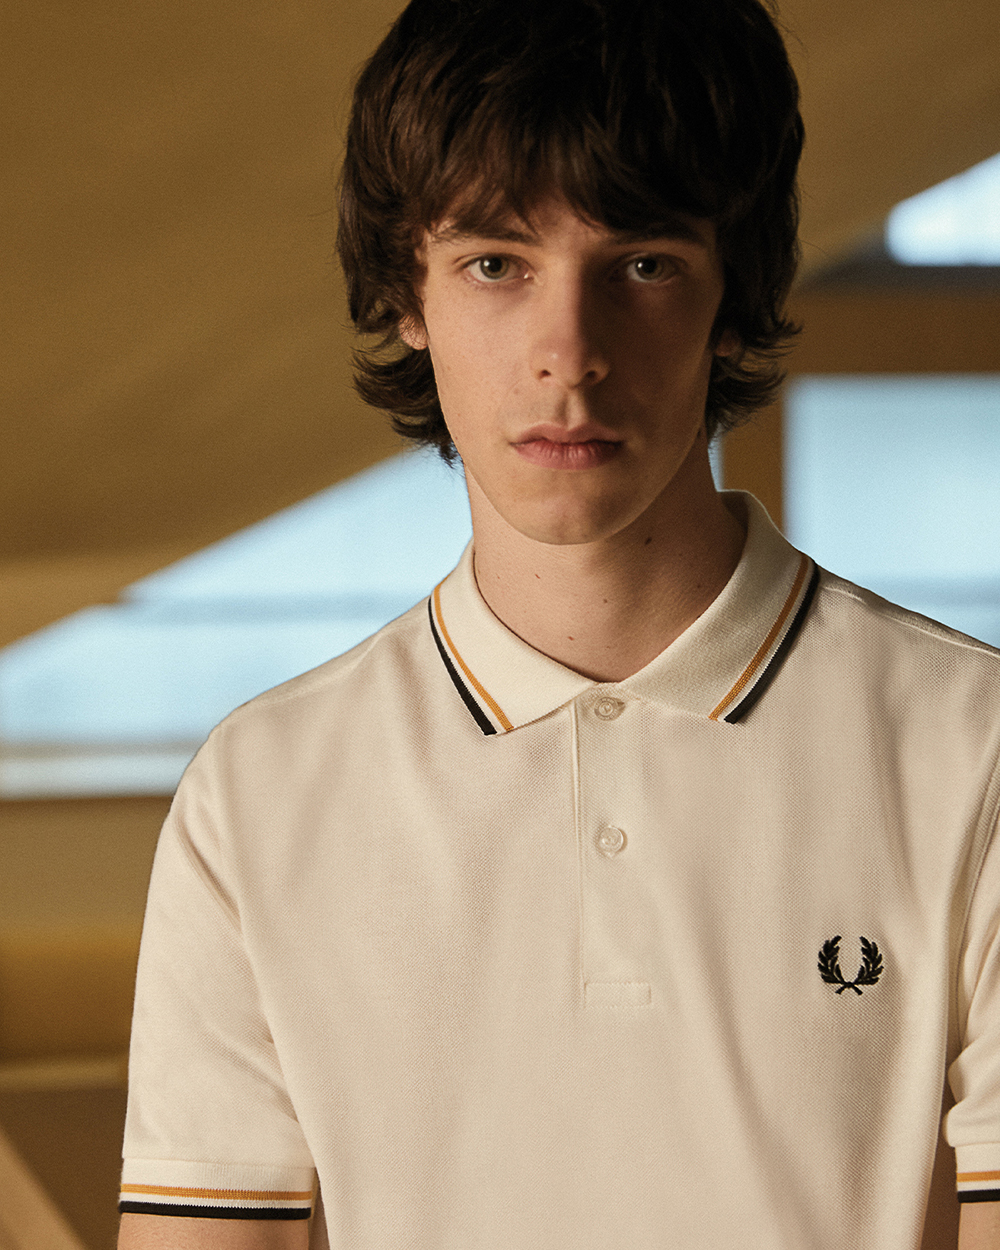 FRED PERRY POLOSHIRT M12N NAVY ICE-